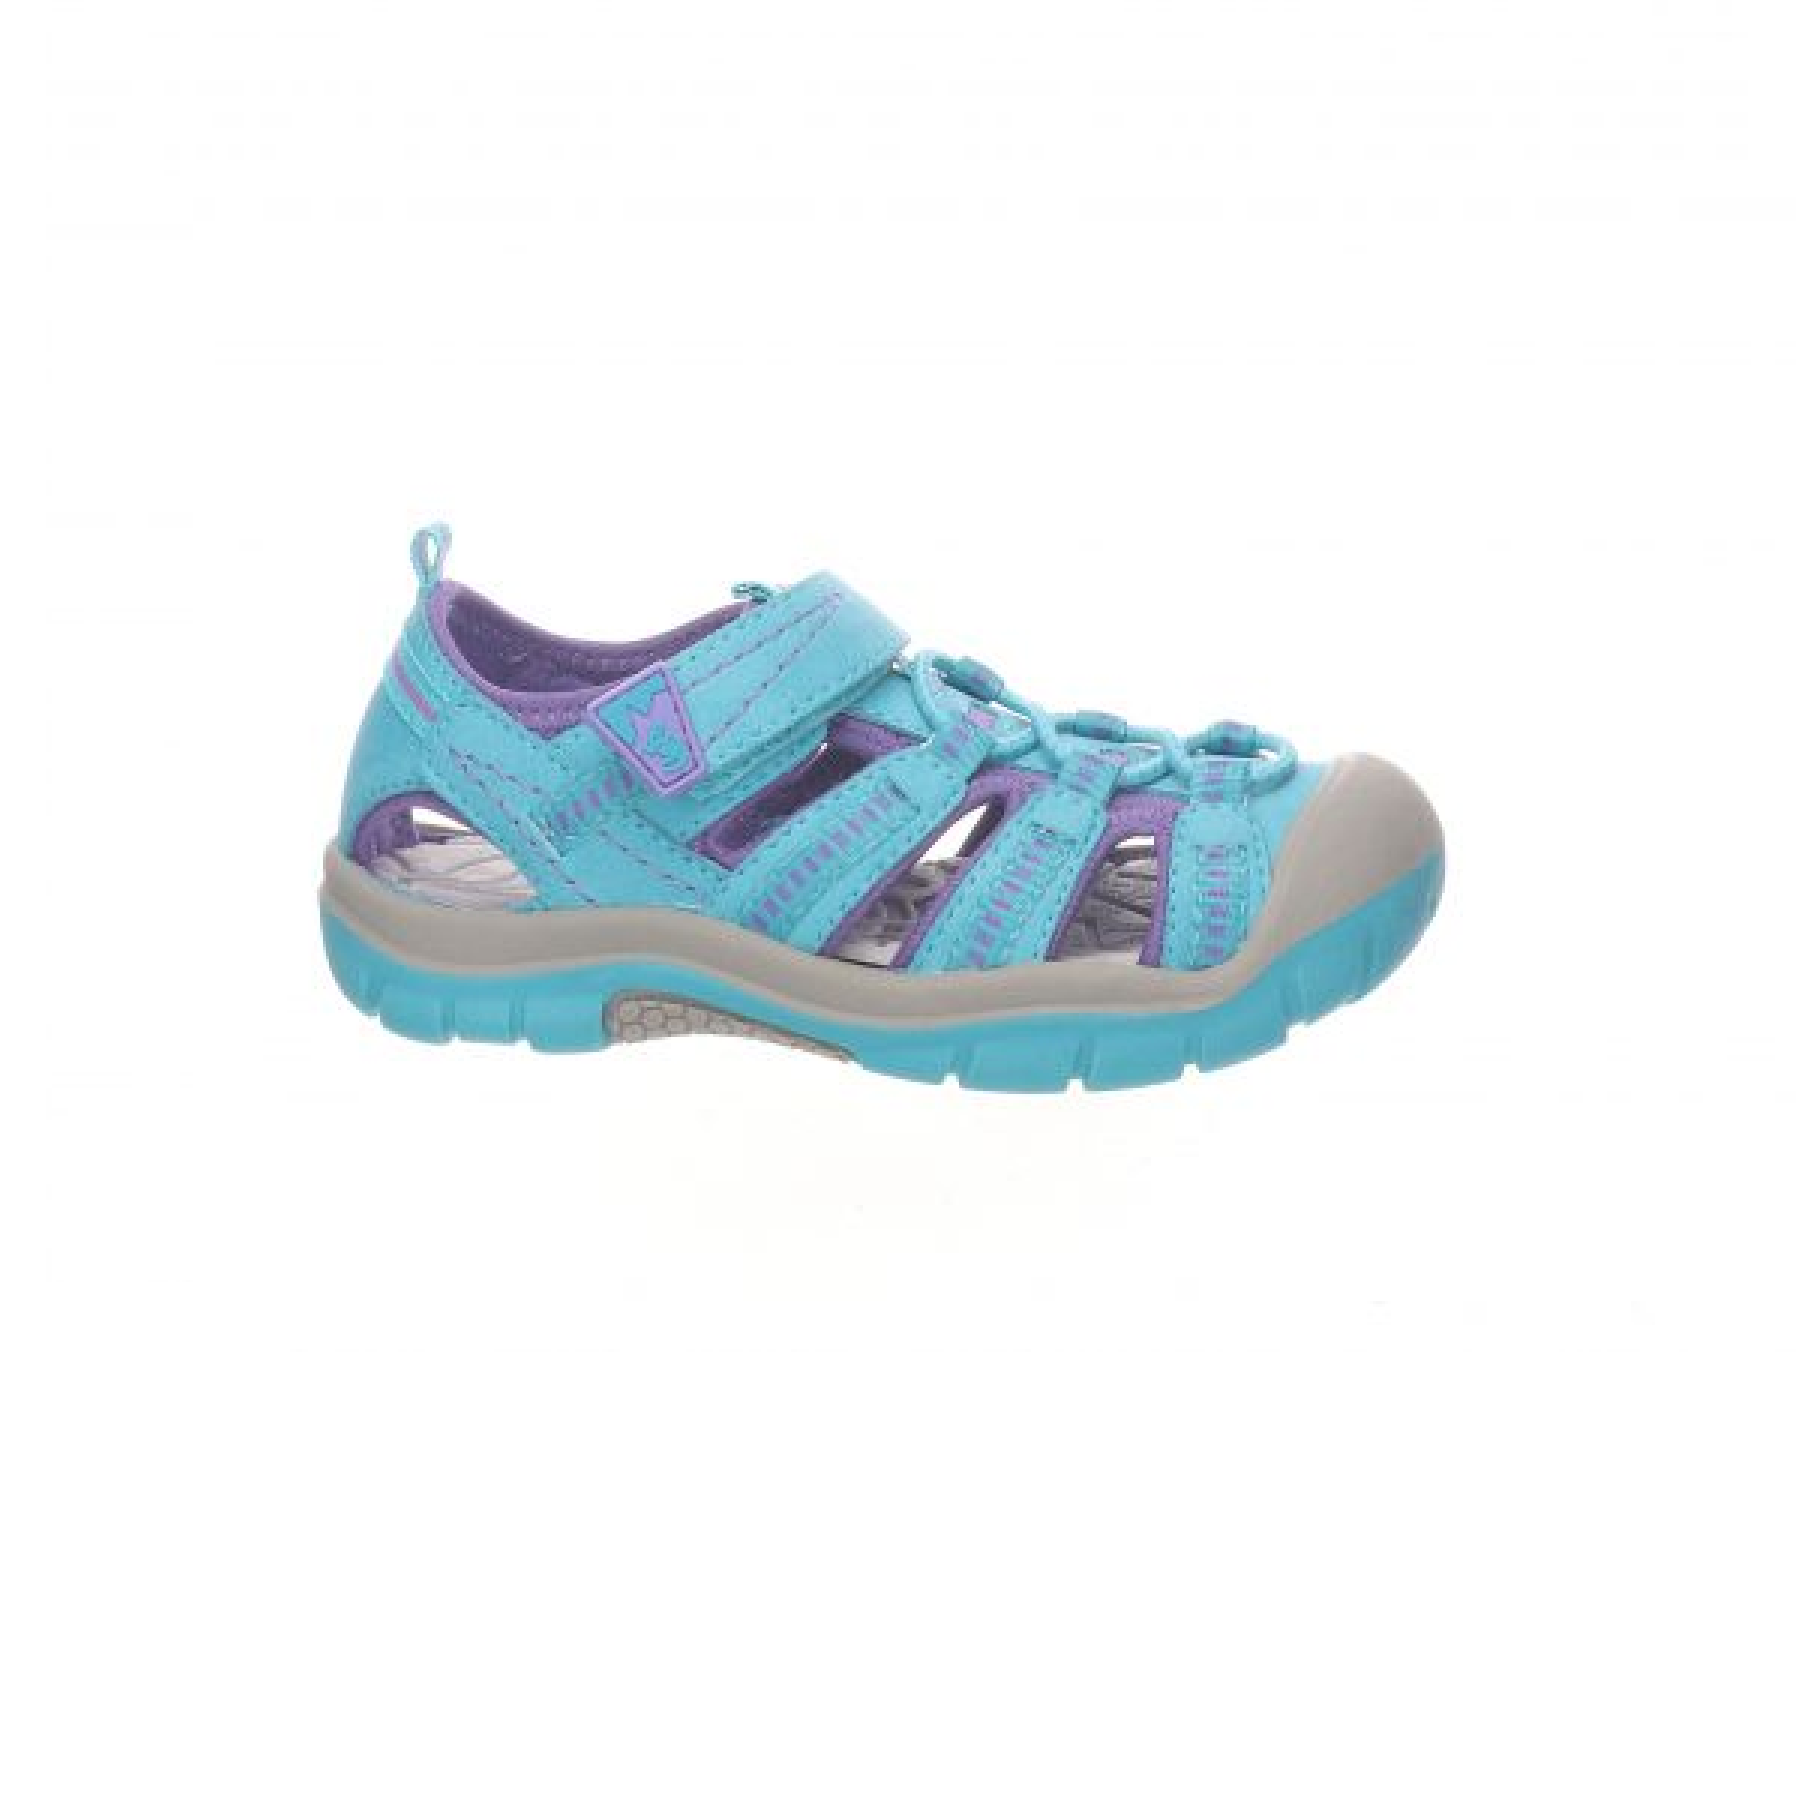 LURCHI GIRLS OPEN SHOES/SANDALS - PETE - 33/21610/40 - TURQUOISE – Chicos &  Chicas Shoes